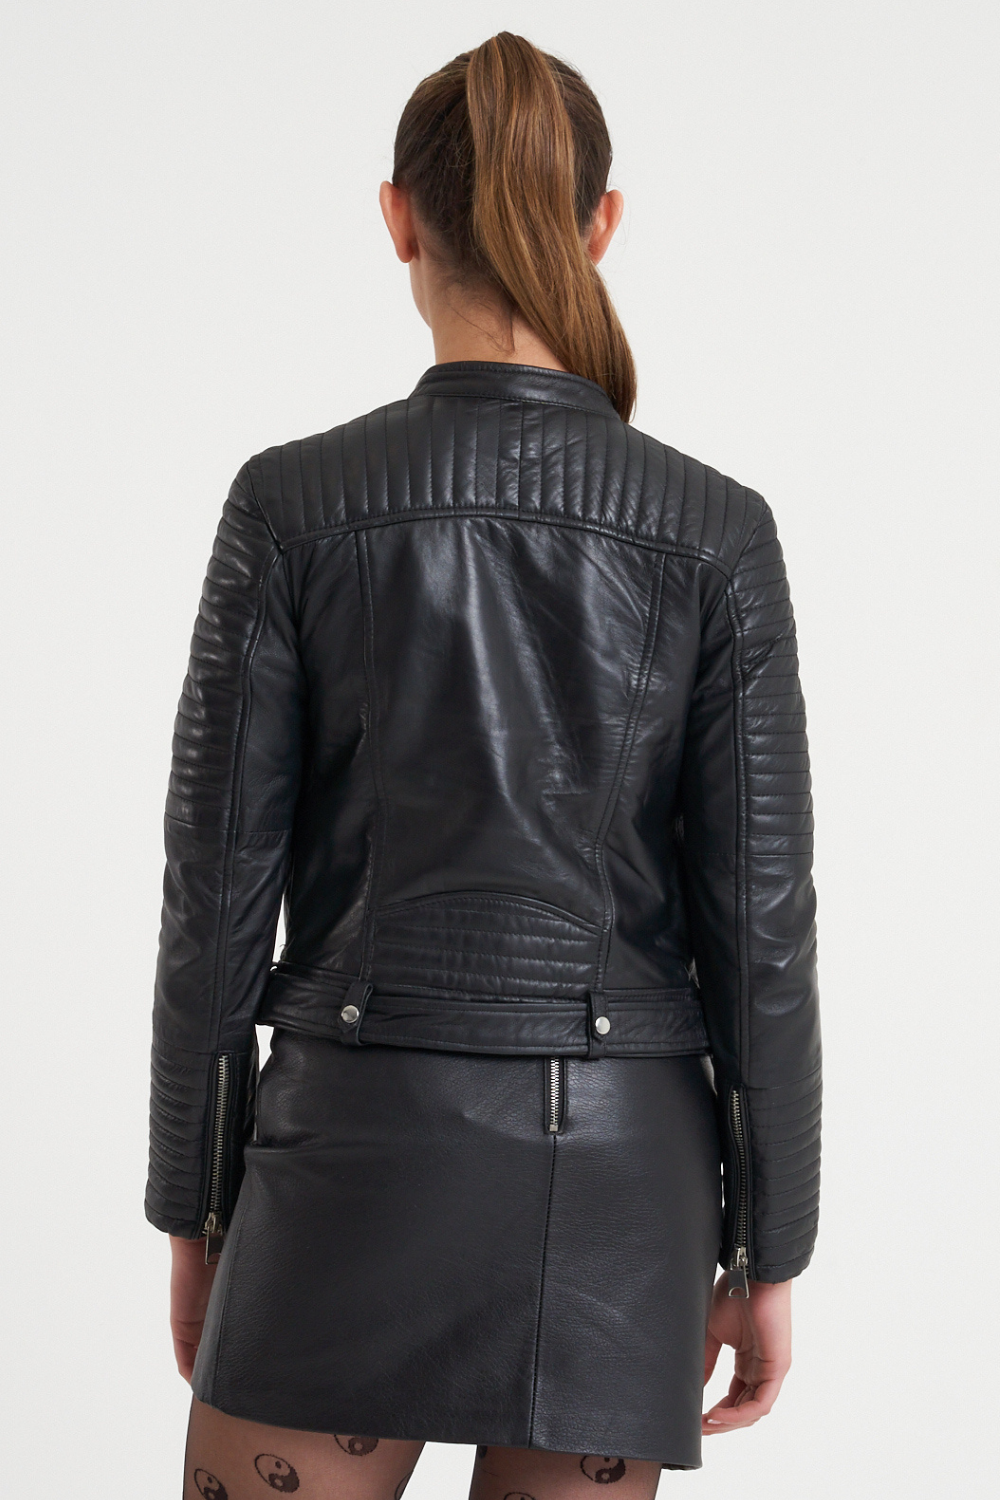 This leather jacket features all the hallmarks of an iconic racer jacket; tab neck collar, adjustable waistbelt and asymmetric zipline. This gorgeous piece also features unique ribbed shoulder detailing that is wadded for extra dimension.